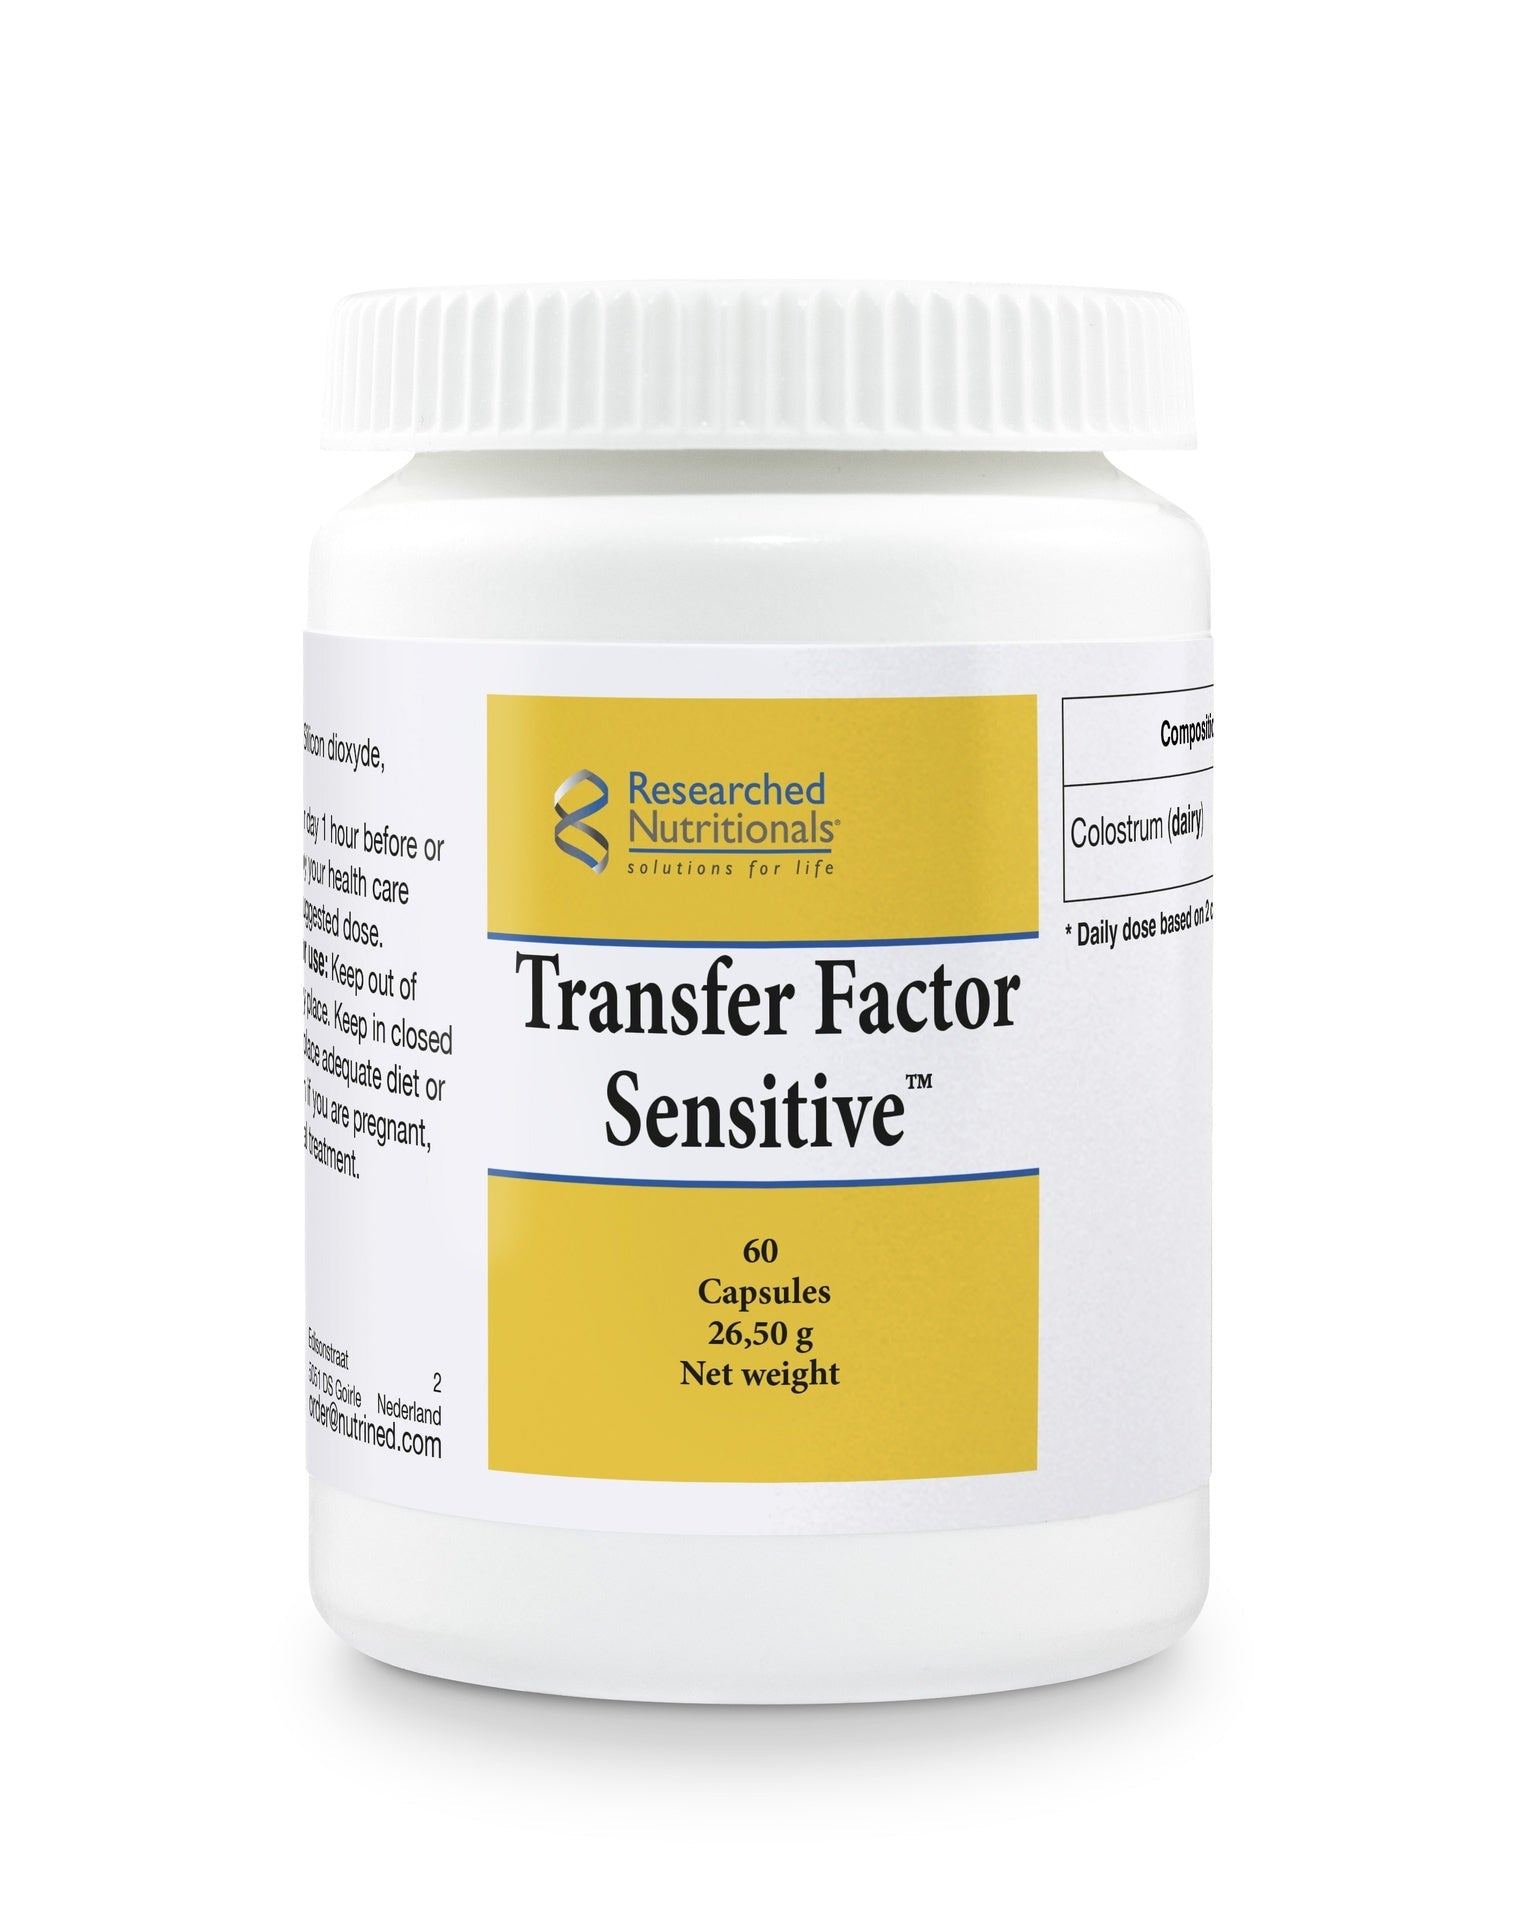 Transfer Factor Sensitive - 60 Capsules | Researched Nutritionals